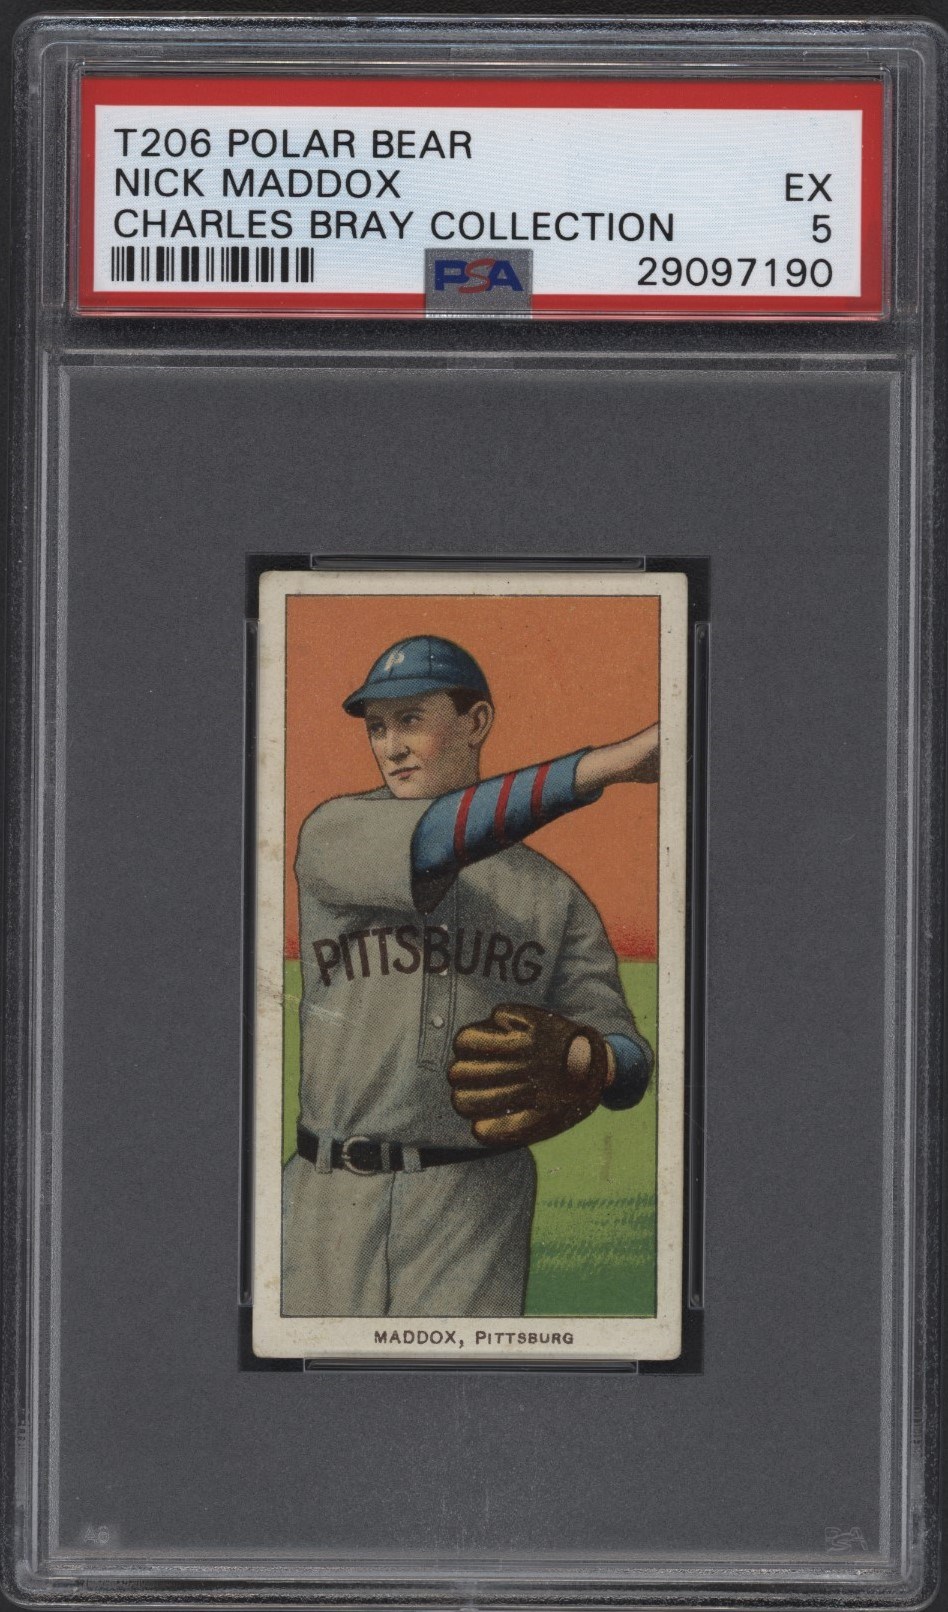 T206 Polar Bear Nick Maddox PSA EX 5 From the Charles Bray Collection